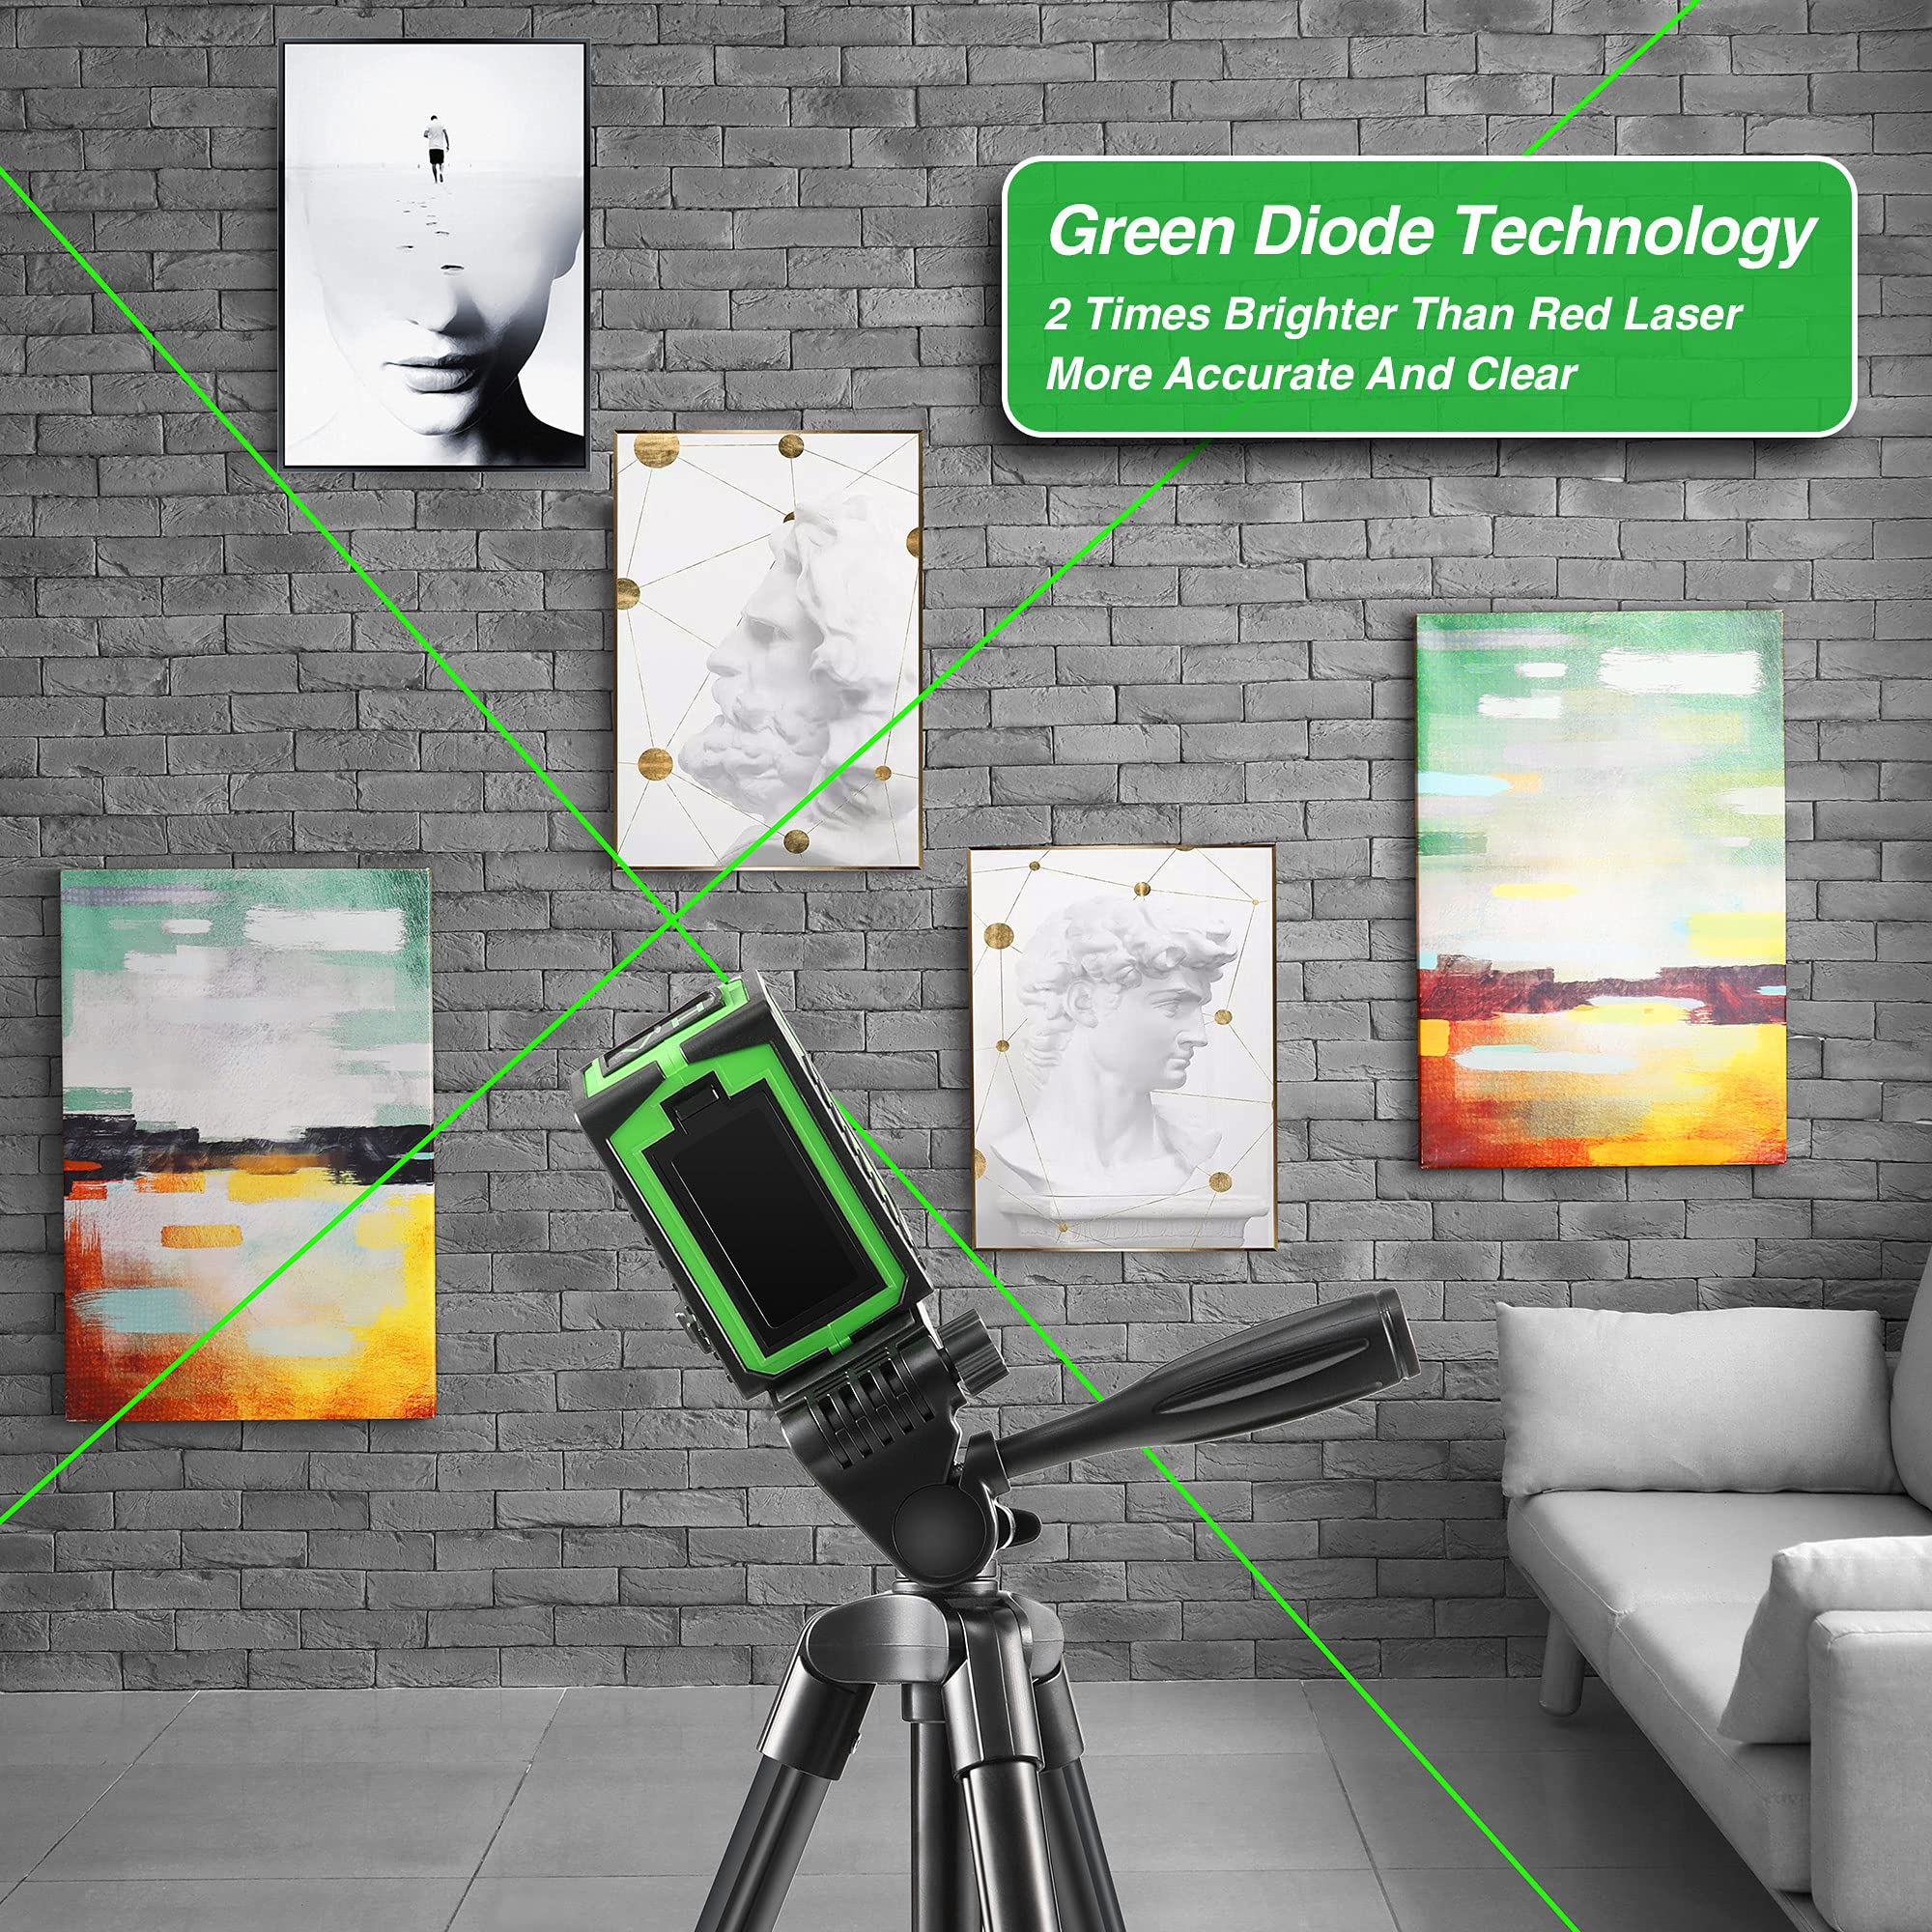 Laser Level with Tripod, 50 ft Laser Leveler Tool Laser Level Green Cross Line Self Leveling, Separate Control 2 Lines, Laser Level for Picture Hanging Construction DIY Light Duty Indoor Project